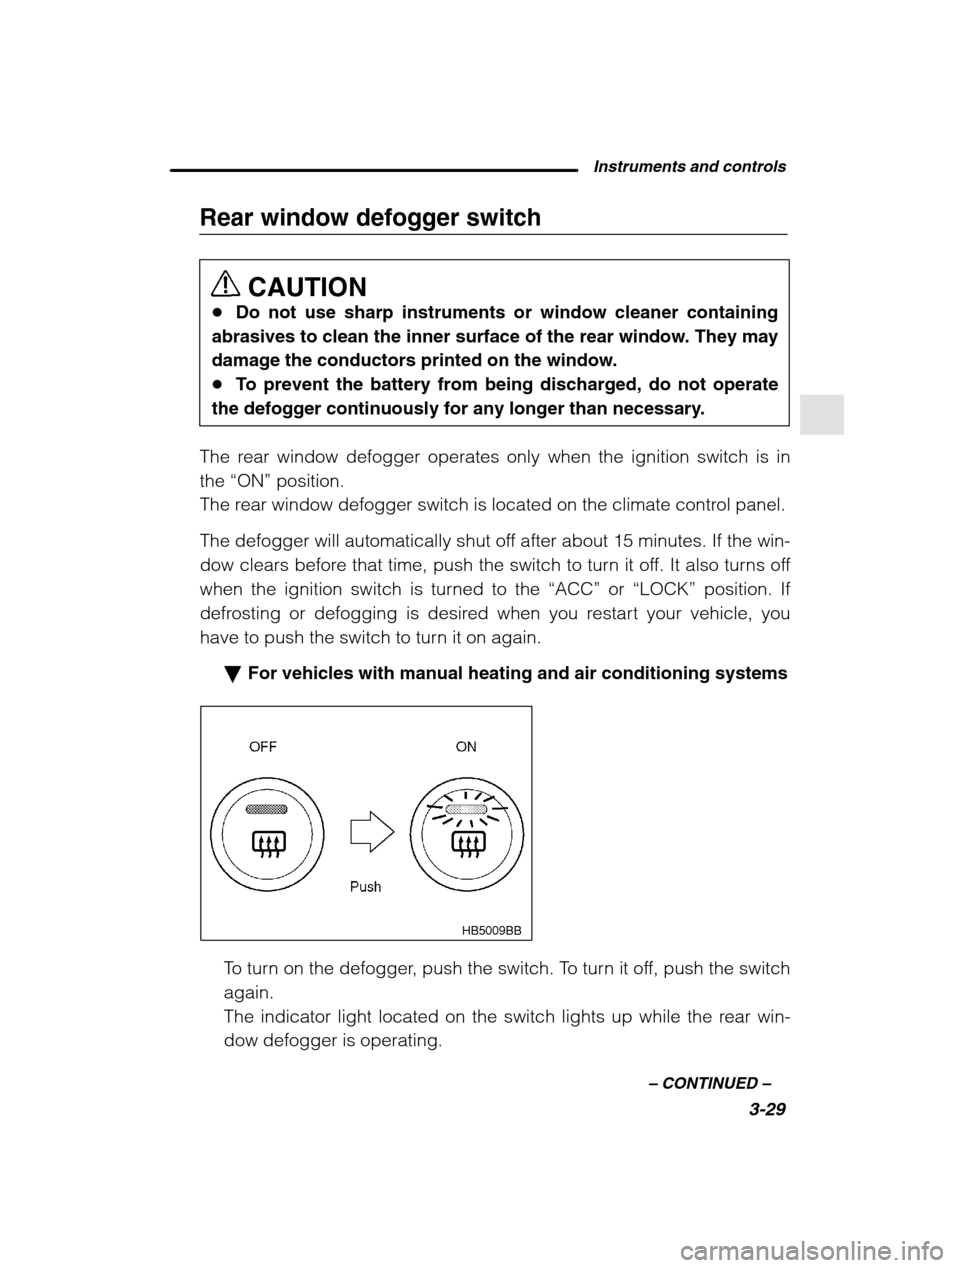 SUBARU FORESTER 2002 SG / 2.G Owners Manual Instruments and controls3-29
–
 CONTINUED  –
Rear window defogger switch
CAUTION
� Do not use sharp instruments or window cleaner containing
abrasives to clean the inner surface of the rear window